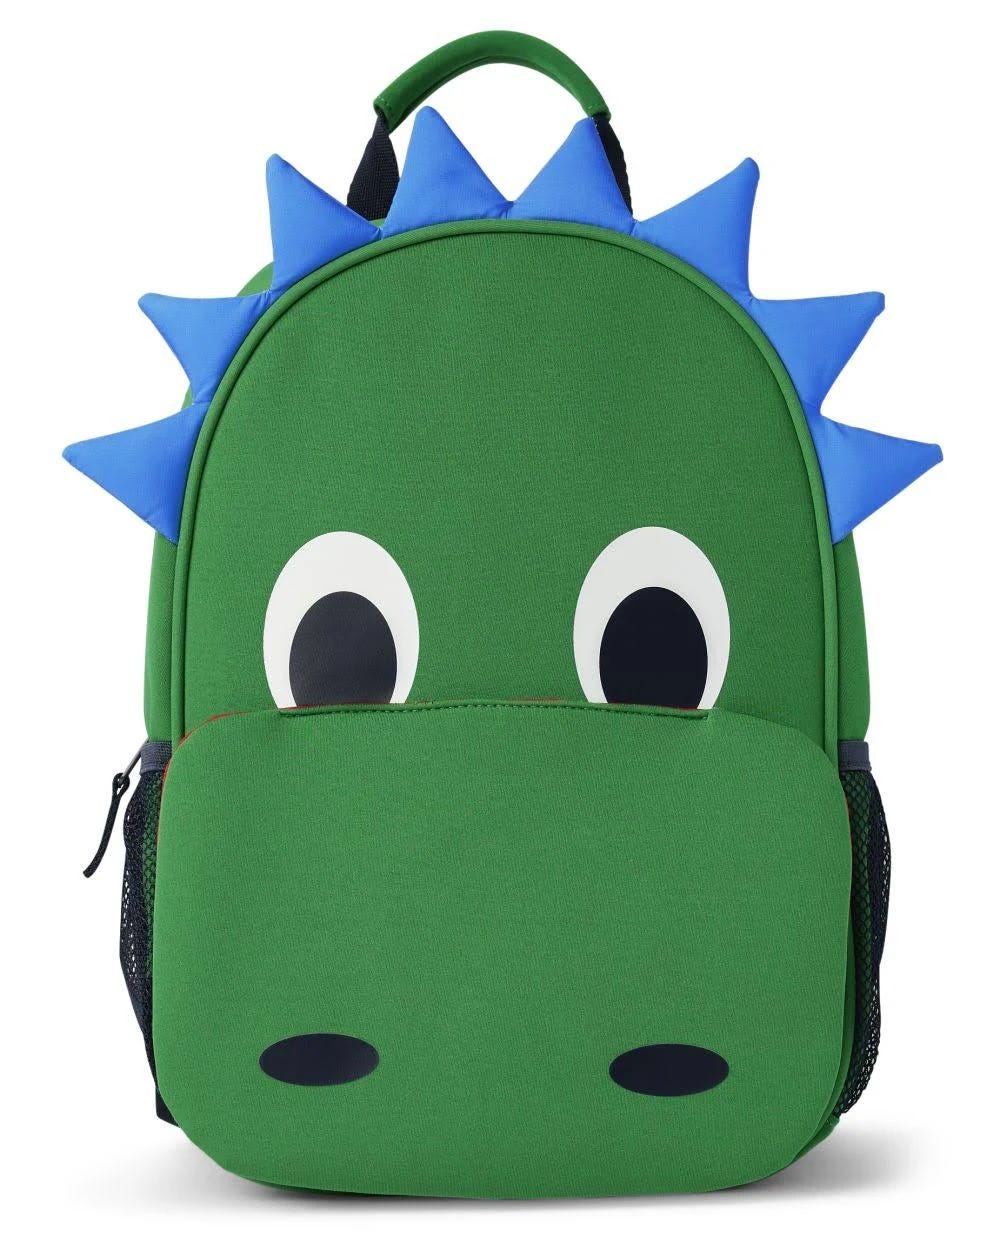 Embroidered Dino Backpack for Toddlers: Zip, Mesh Pockets, and Adjustable Straps | Image